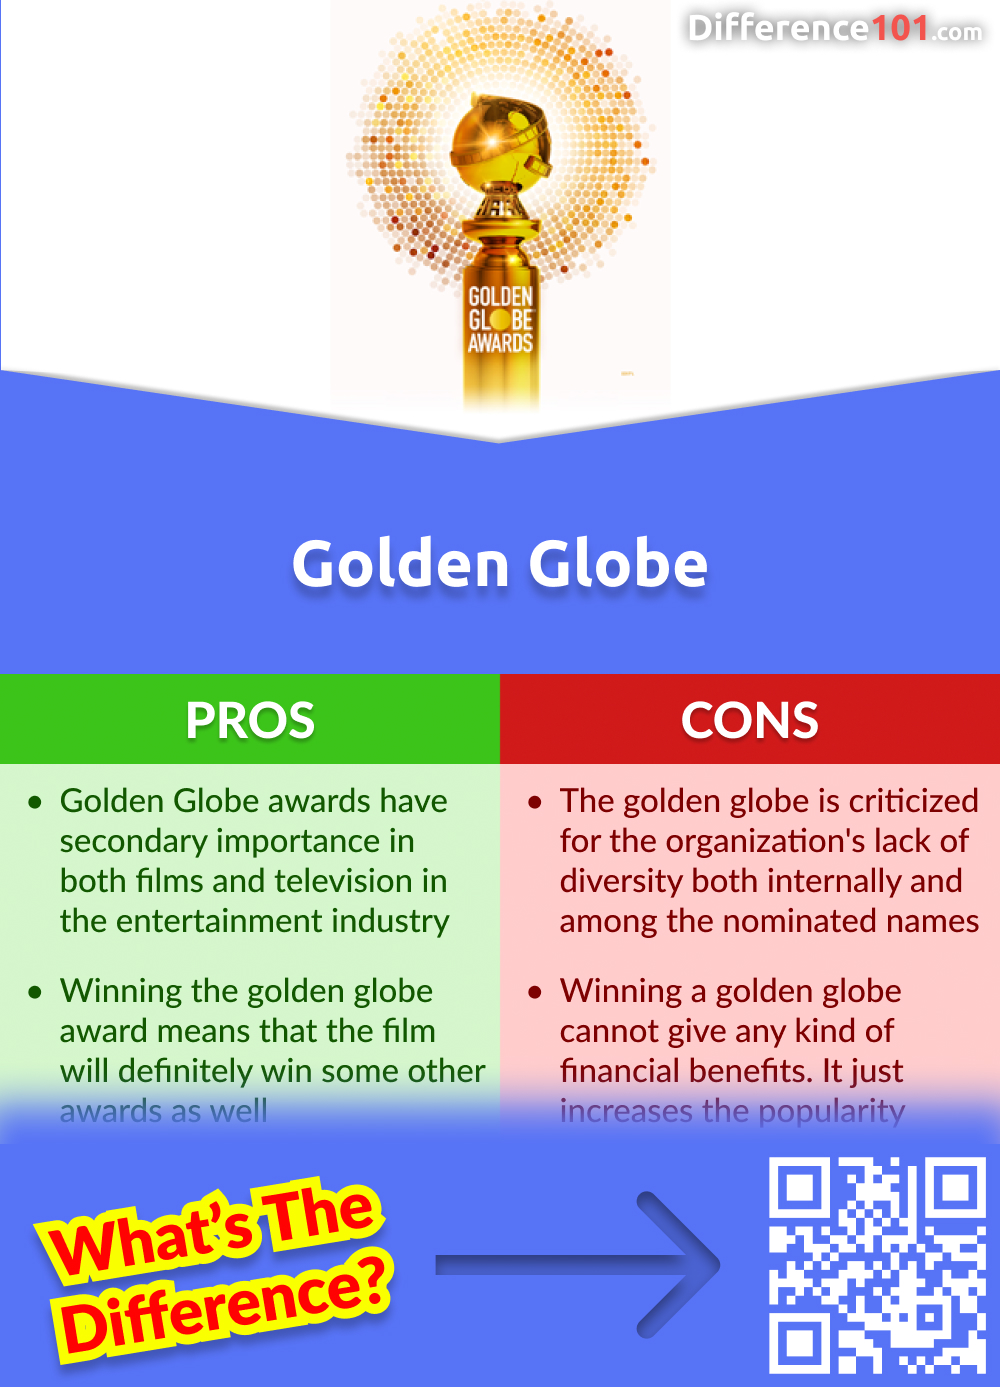 Golden Globe Pros and Cons